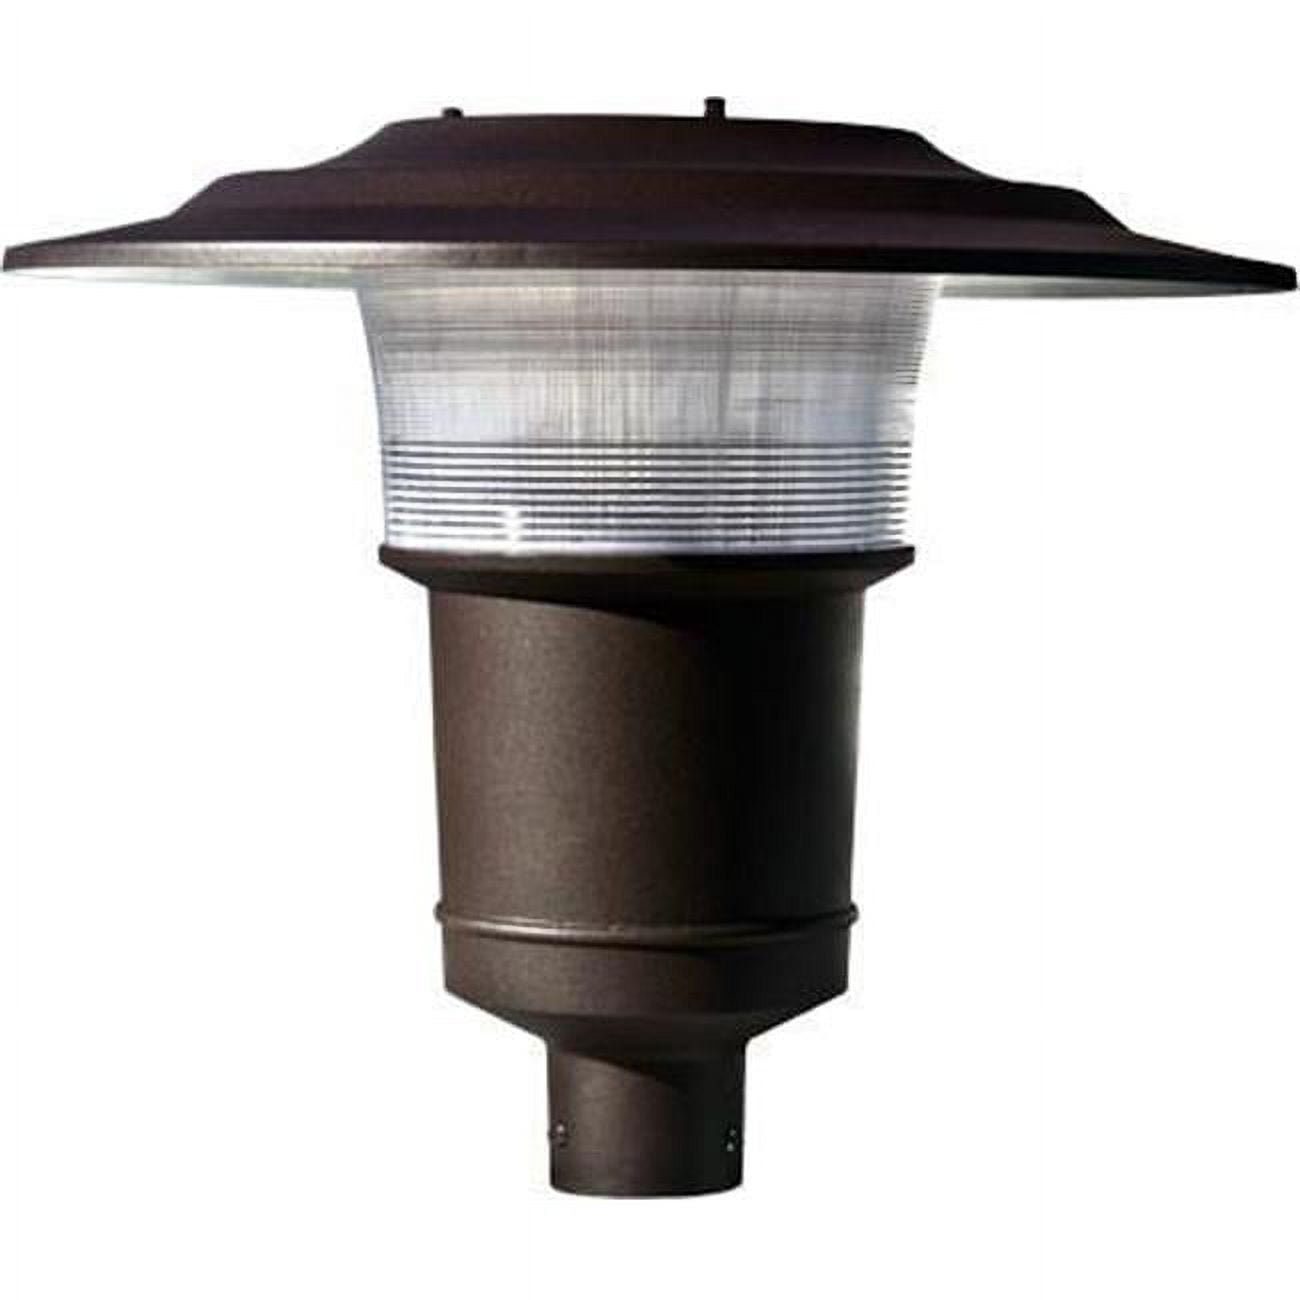 Picture of Dabmar Lighting GM651-BZ Powder Coated Cast Aluminum Architectural Post Top Light Fixture, Bronze - 19.50 x 23.13 x 23.13 in.